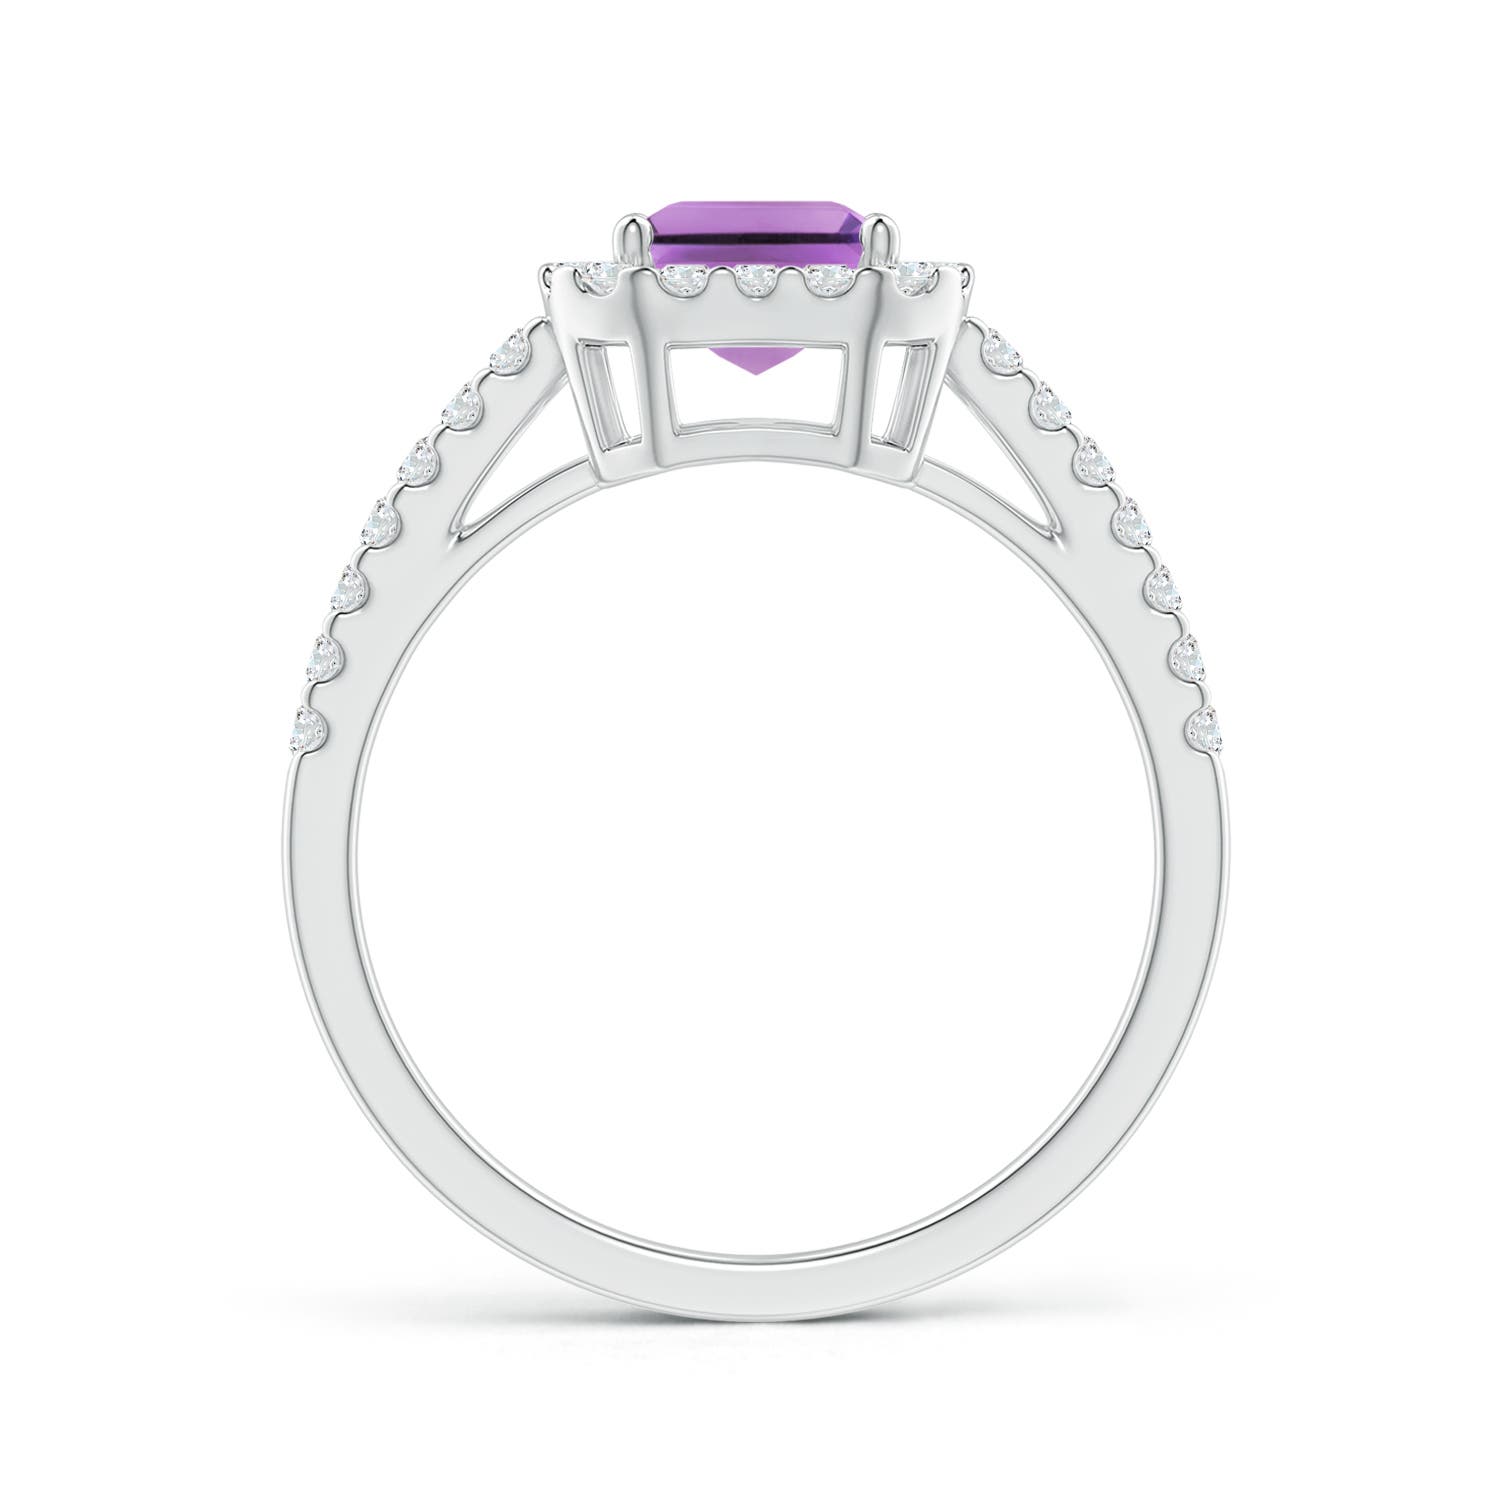 A - Amethyst / 1.91 CT / 14 KT White Gold